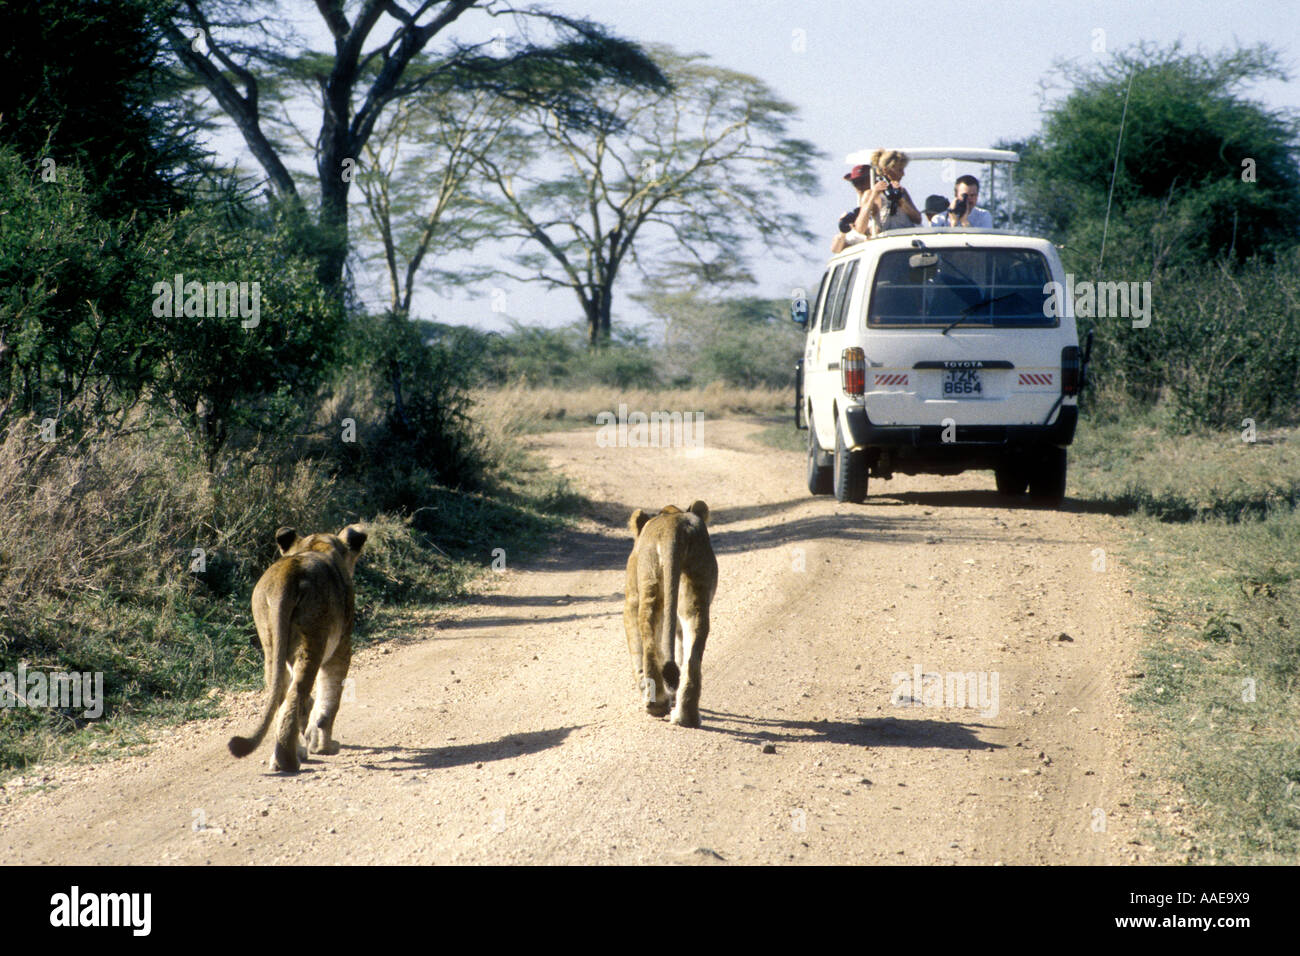 Two lionesses following a white minibus down a dirt road in Serengeti National Park Tanzania East Africa Stock Photo